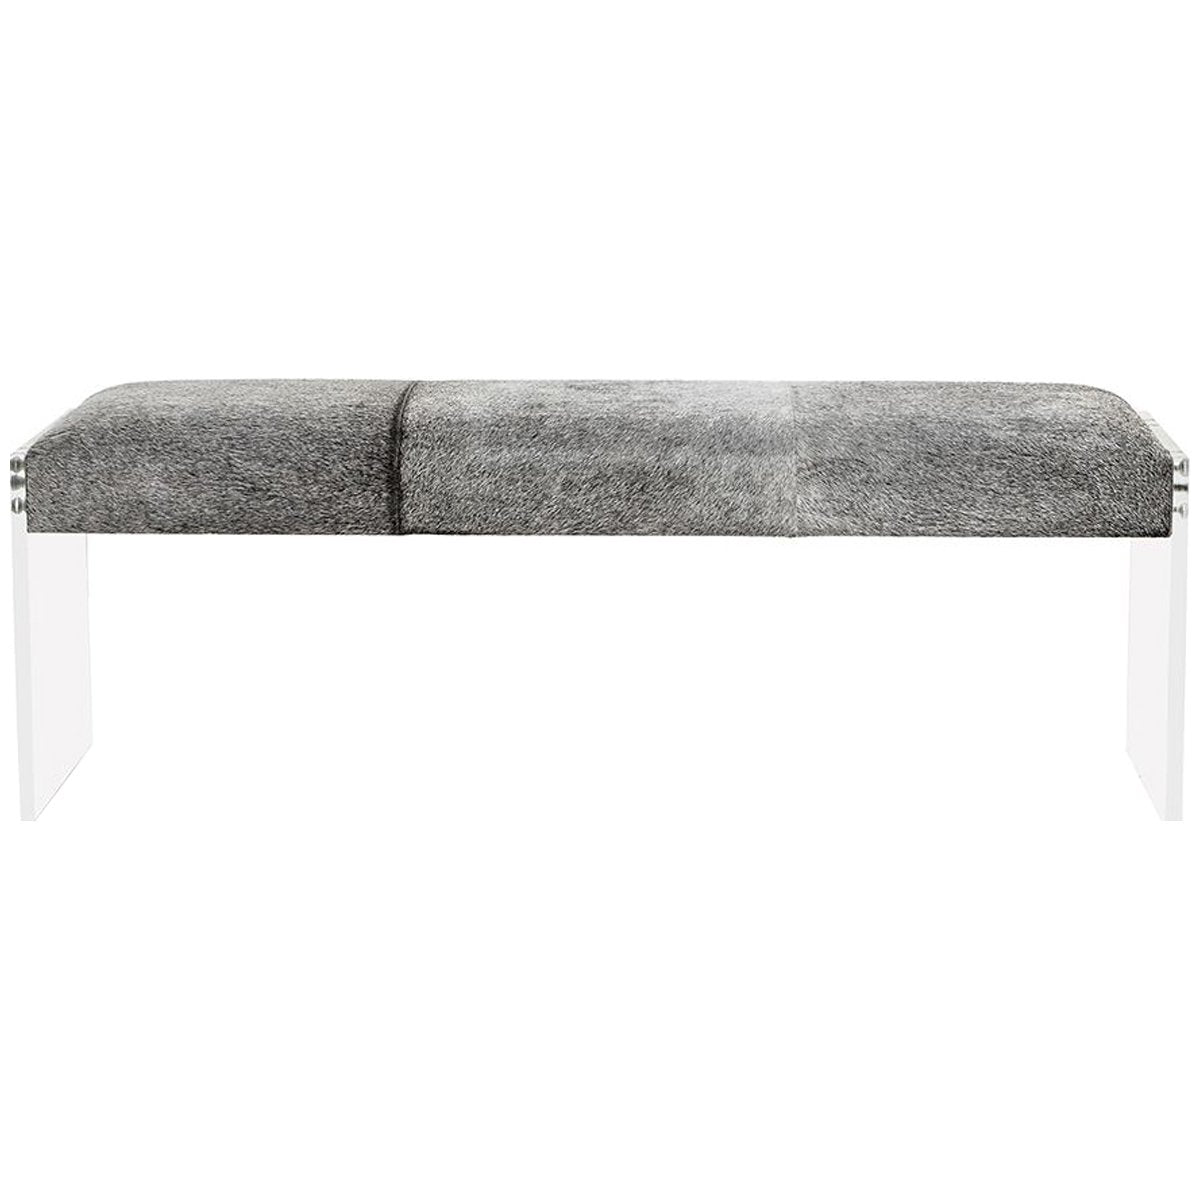 Interlude Home Aiden Bench - Light Natural